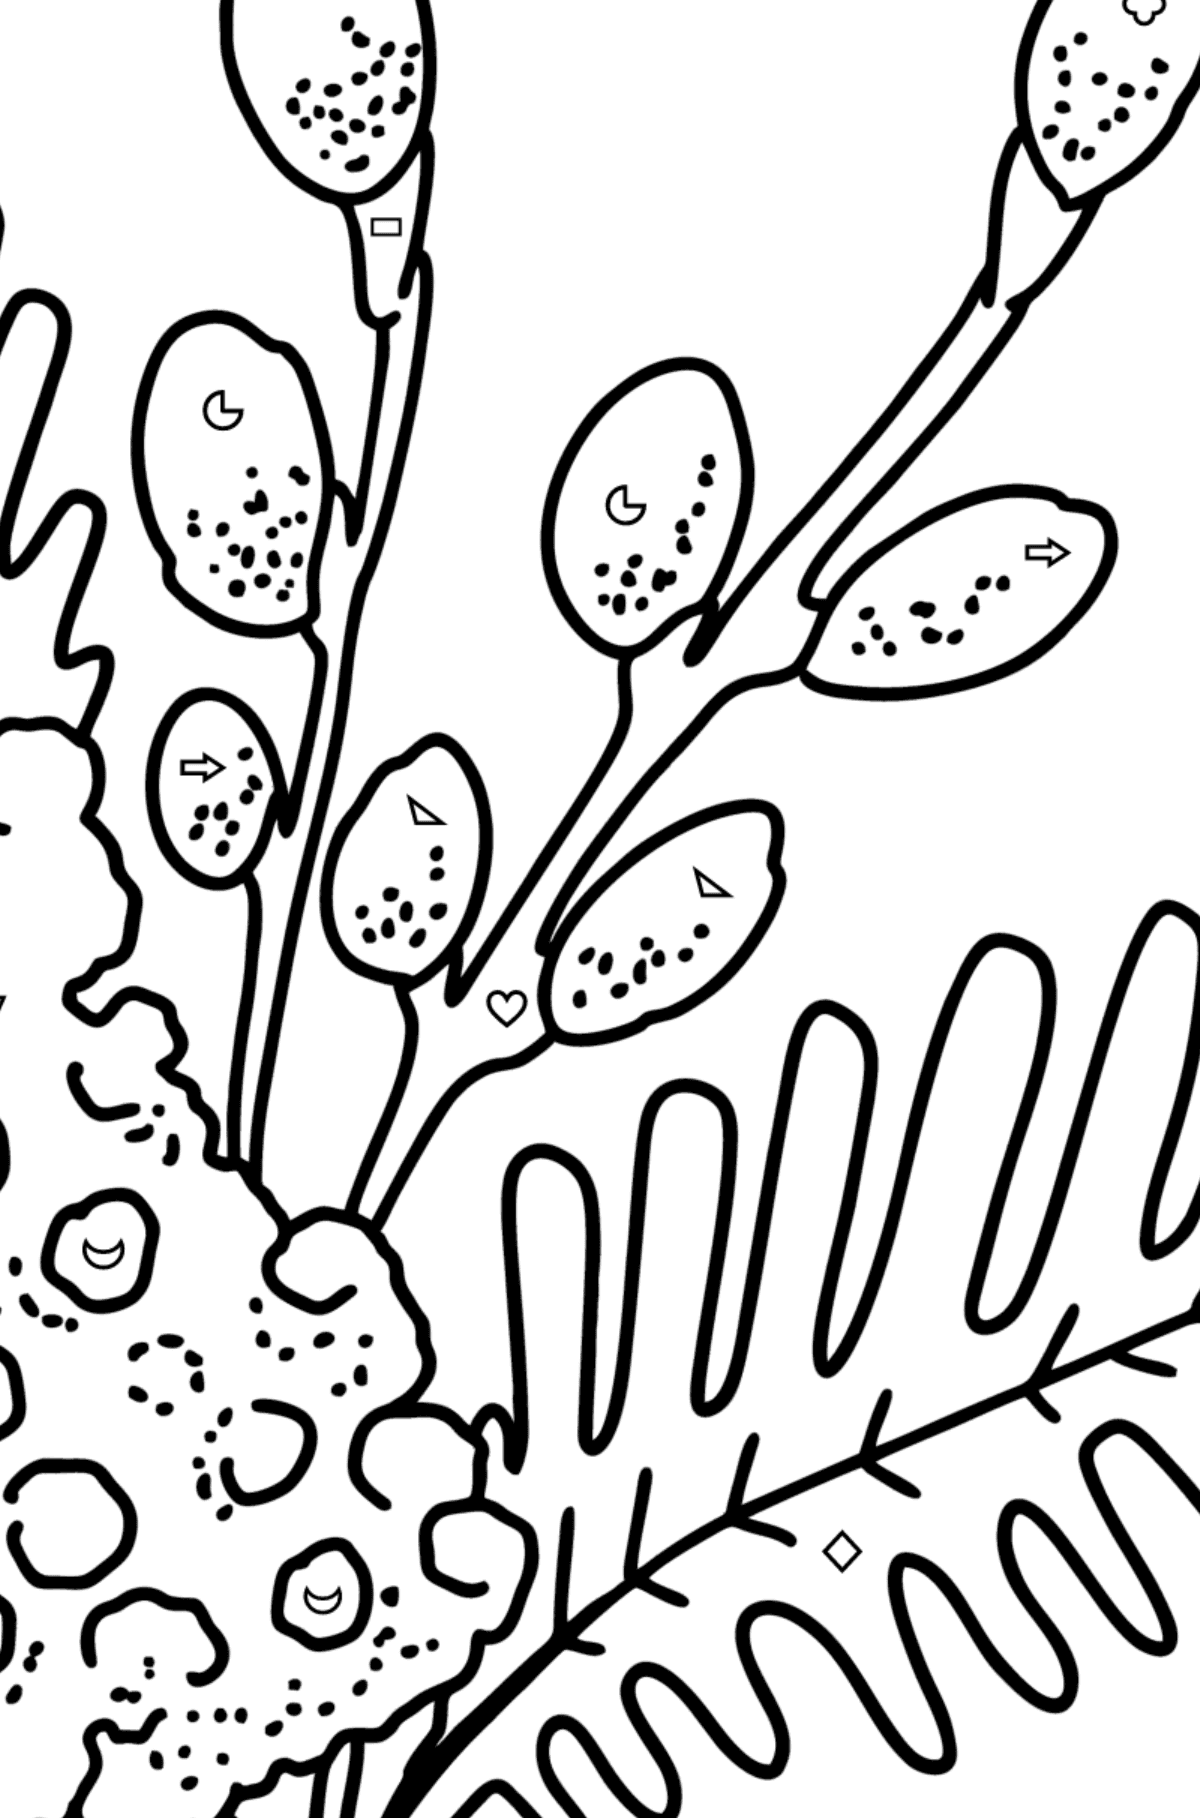 Coloring page - Mimosa and Pussy Willow - Coloring by Geometric Shapes for Kids